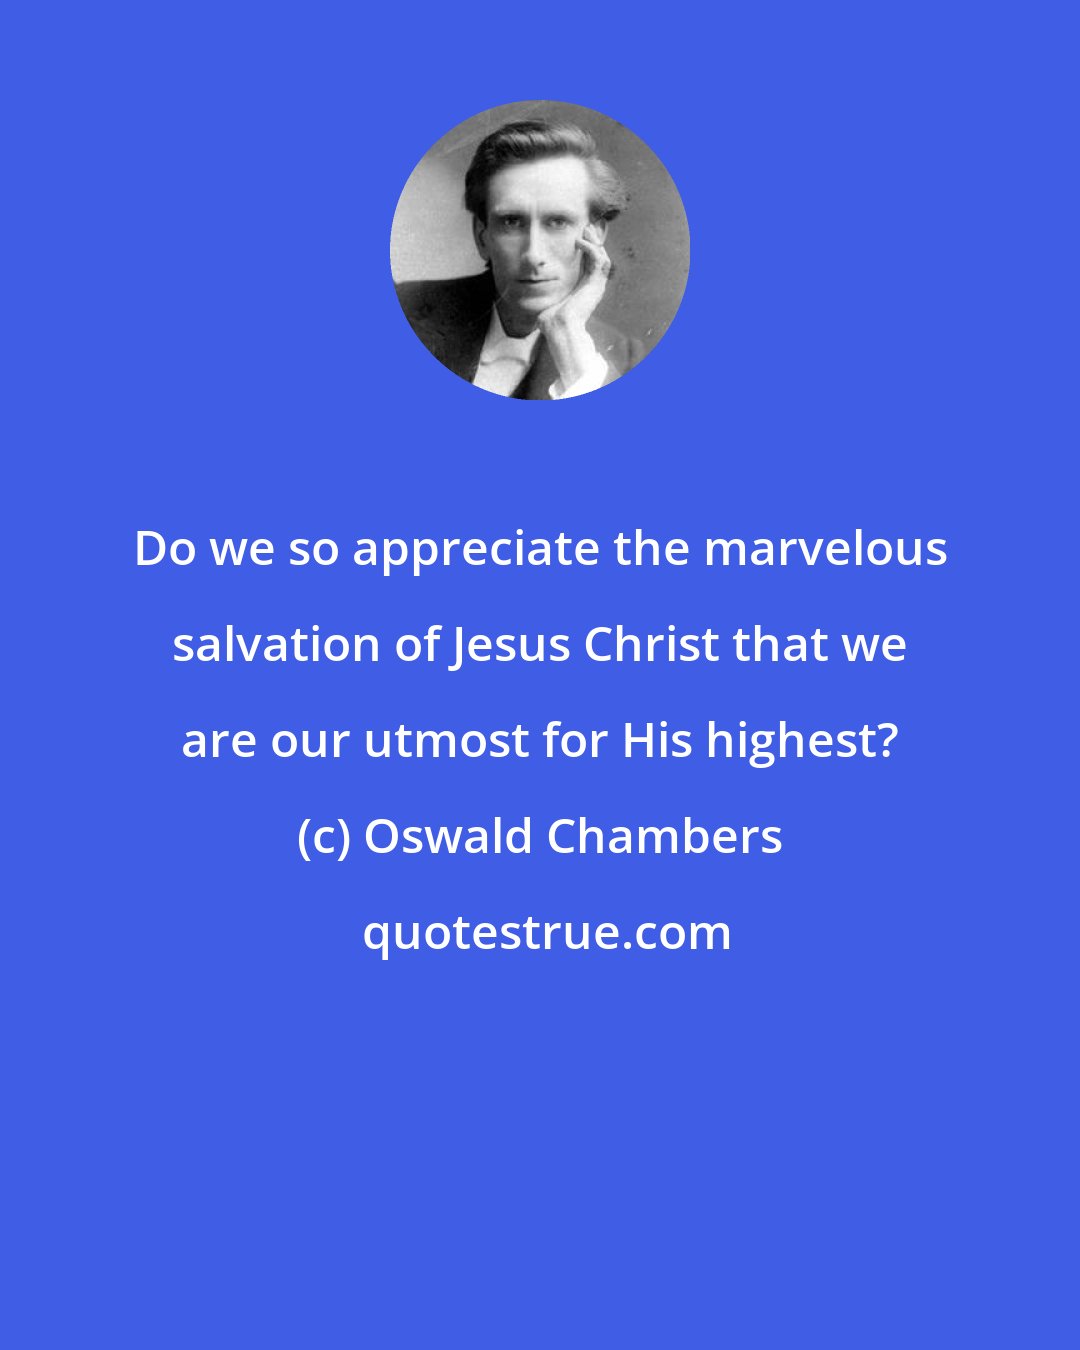 Oswald Chambers: Do we so appreciate the marvelous salvation of Jesus Christ that we are our utmost for His highest?